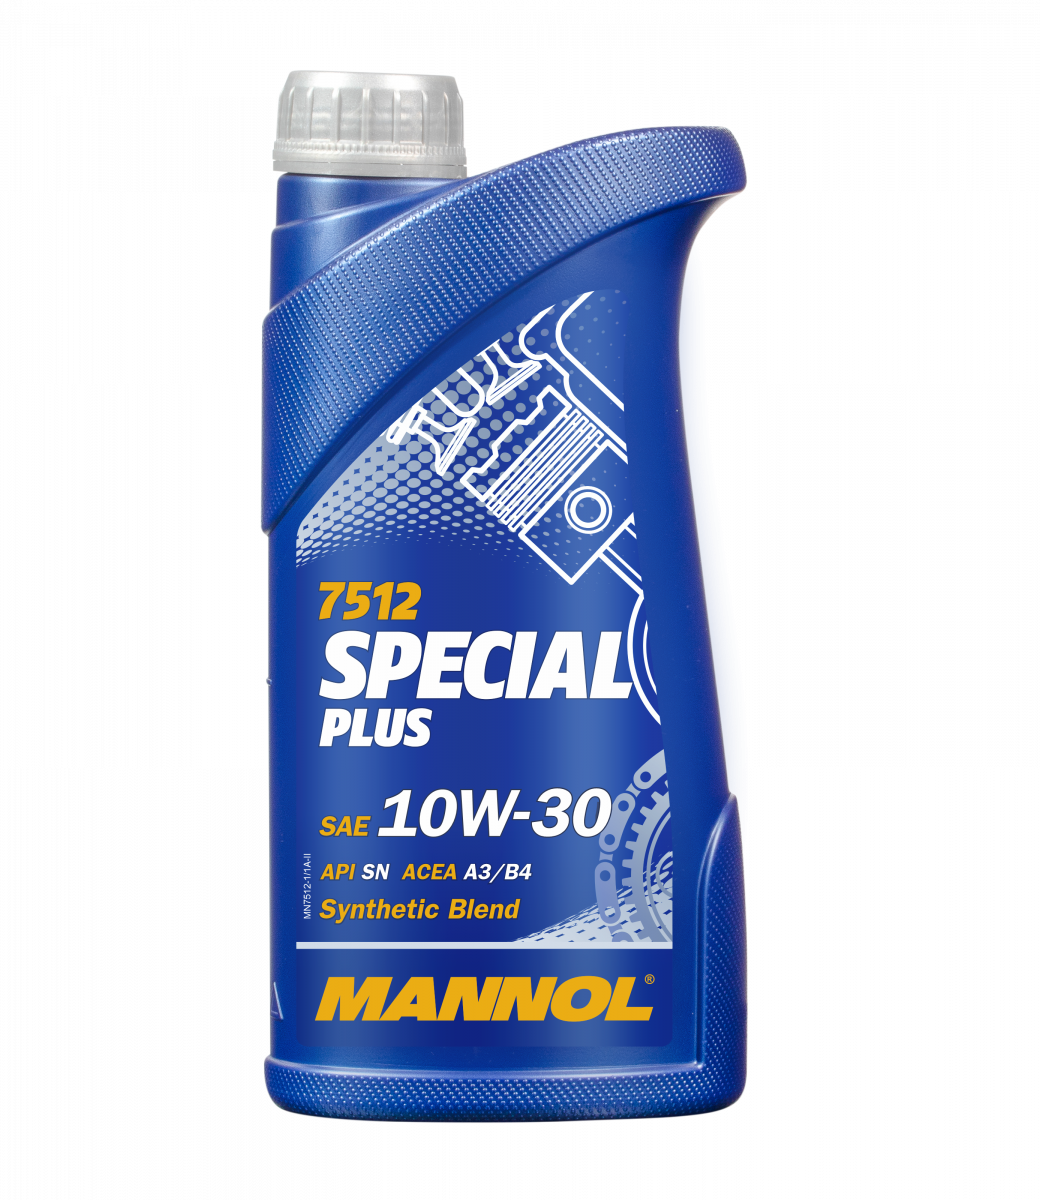 MANNOL 9954 Super BENZIN Octane Plus MULTIFUCTIONAL Petrol Fuel ADDITIVE  Octane Booster +6 Imported from Germany 1:100 Concentration 500 ML :  : Car & Motorbike